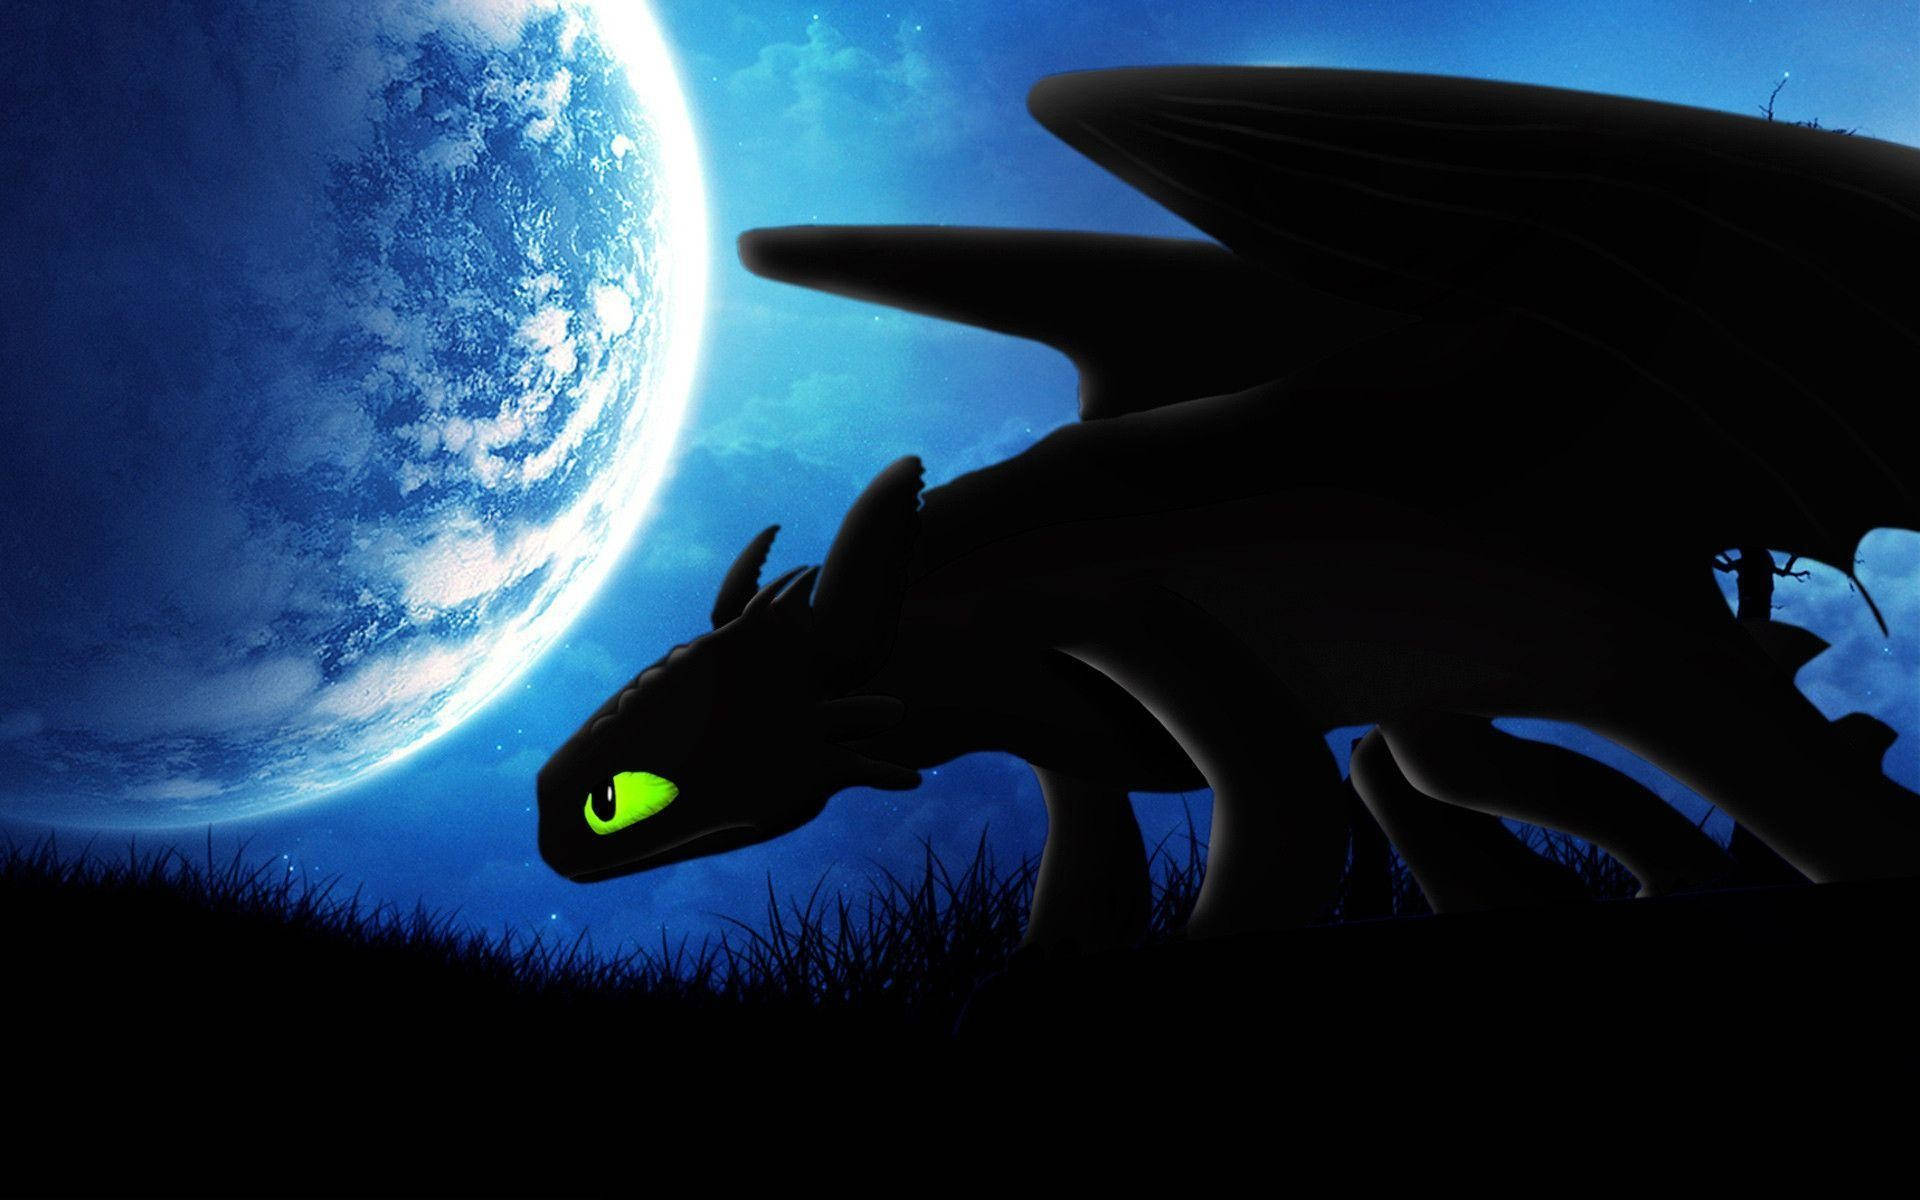 How To Train Your Dragon Night Fury also known as toothless under the full moon wallpaper.